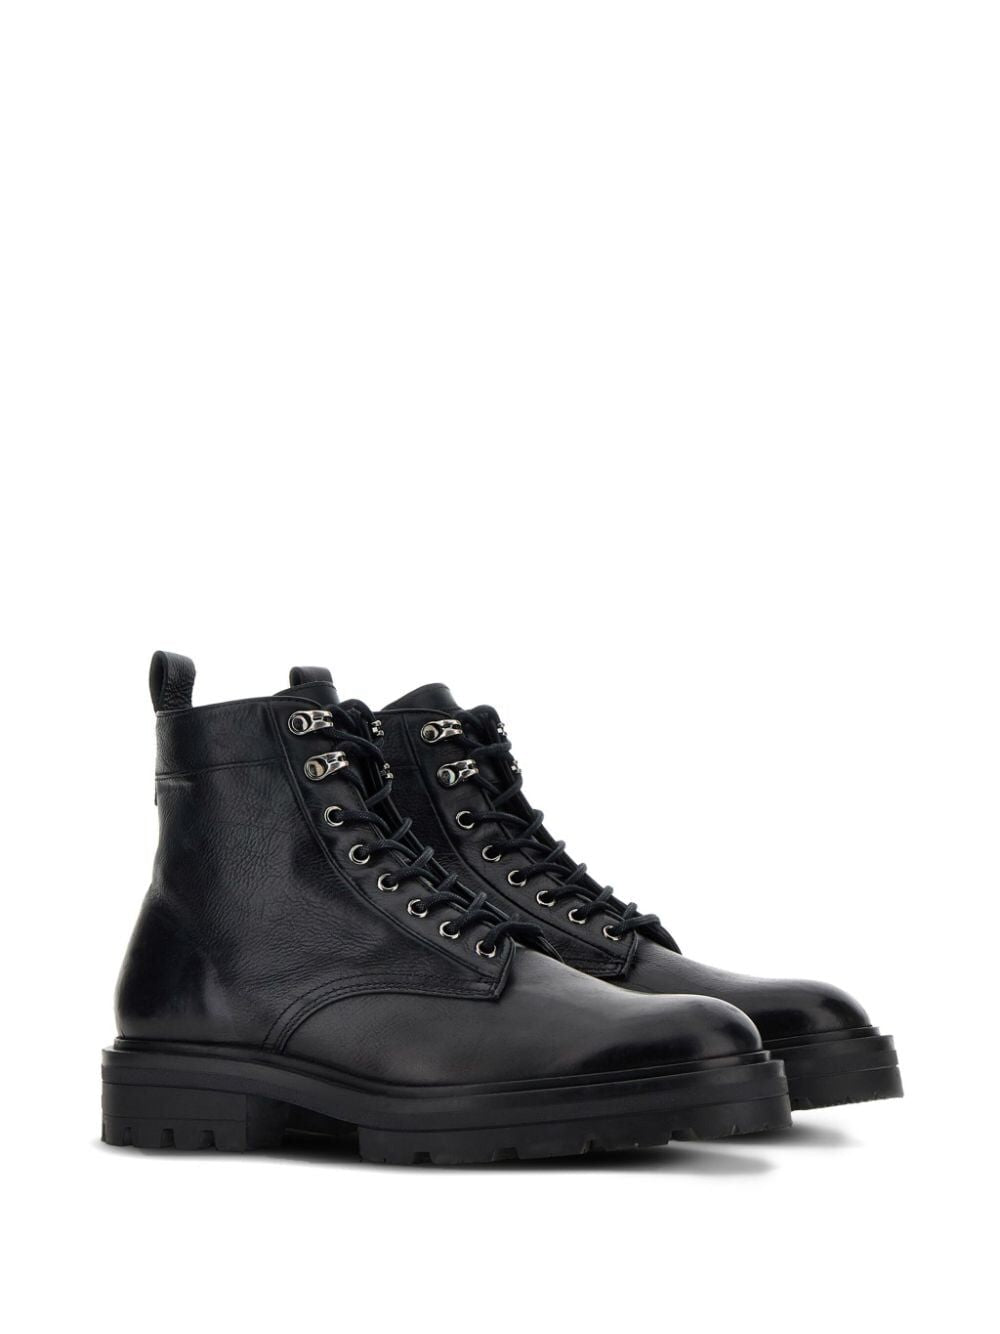 H673 Combact Boots